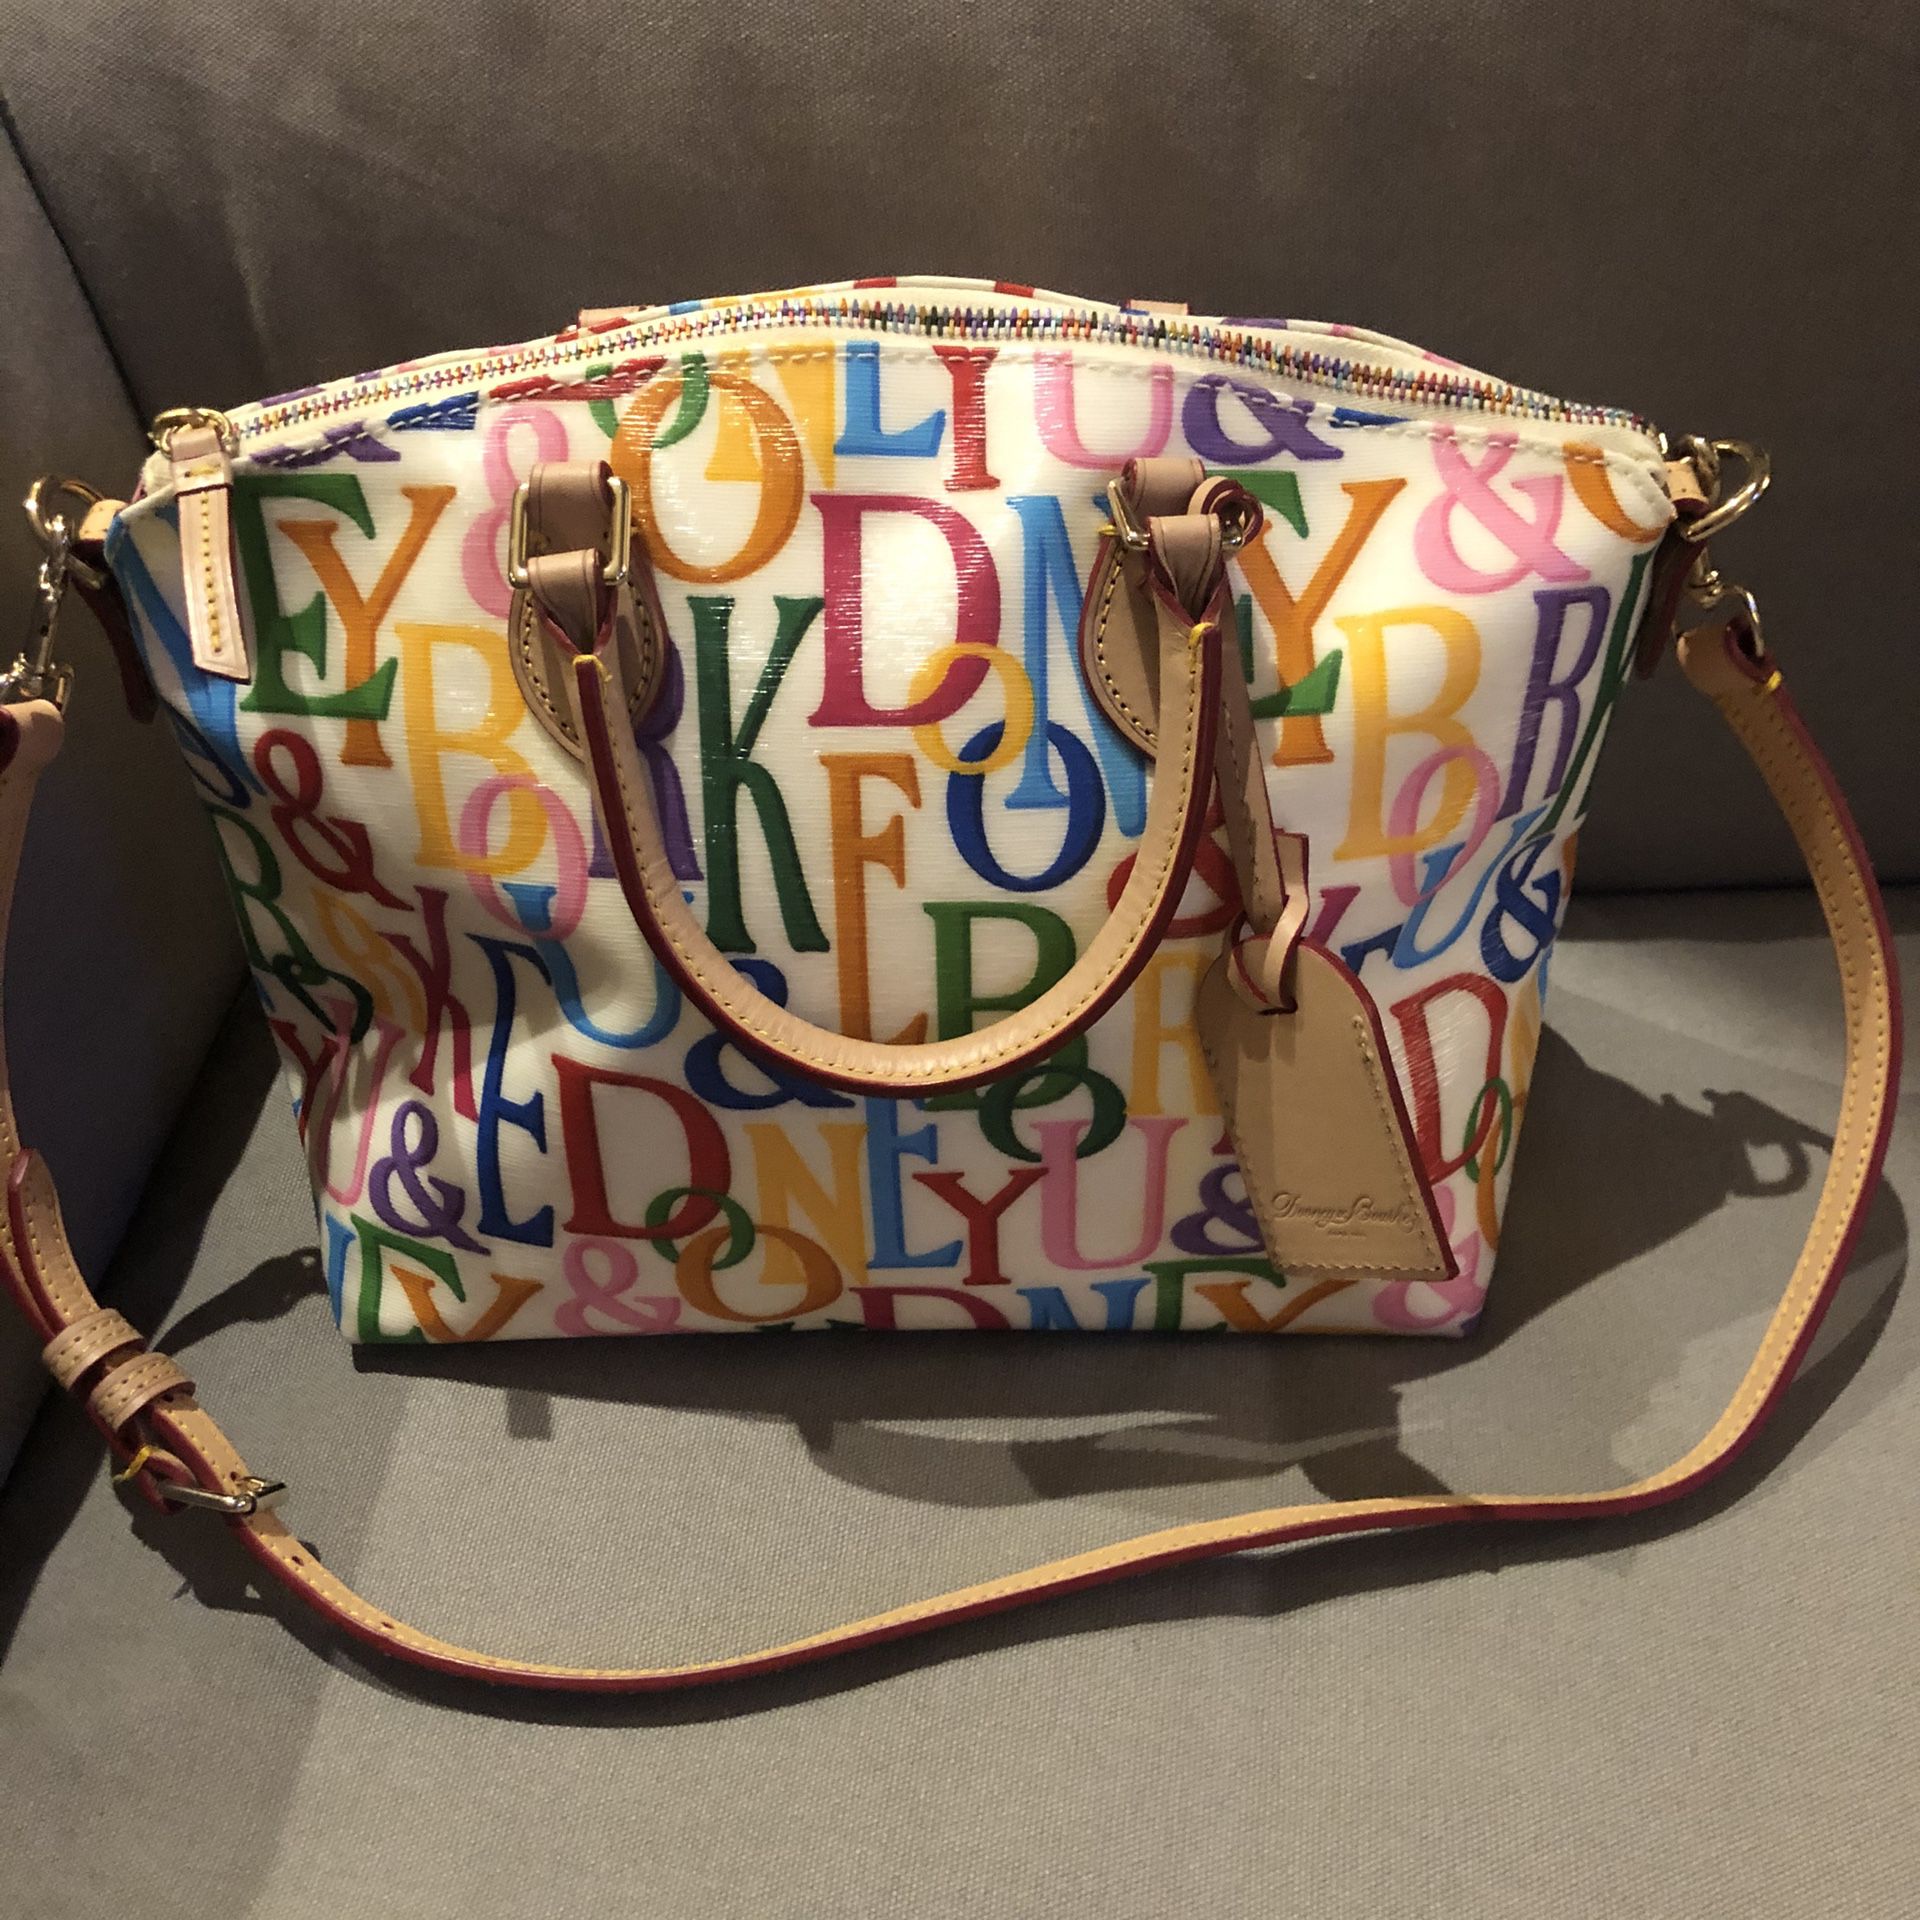 Dooney & Burke White Leather Satchel with colored lettering all over